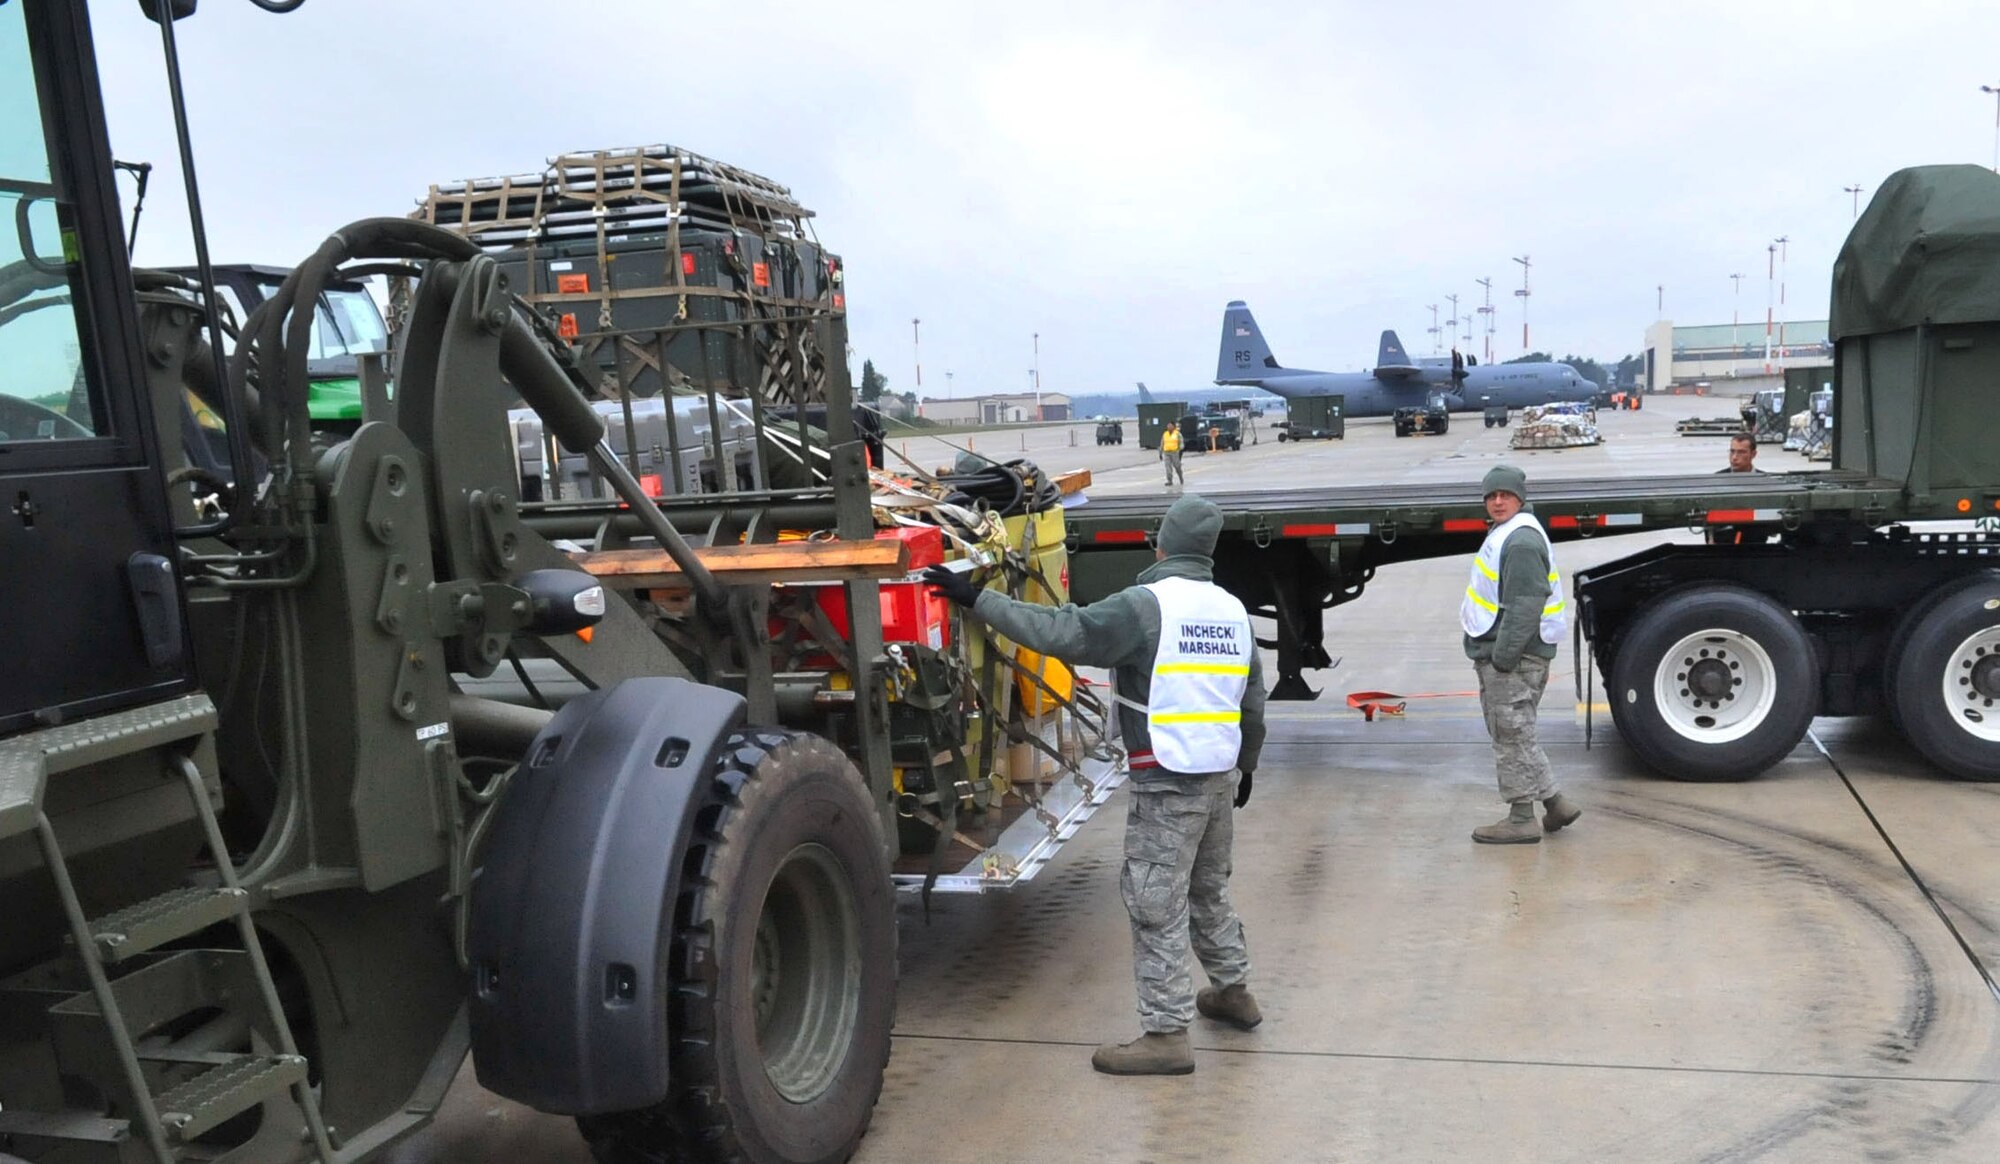 U.S. Air Force personnel unload equipment during an Operational Readiness Inspection , Ramstein Air Base, Germany, Sept. 28, 2010. The ORI is designed to test Airmen's ability to survive, operate and perform fundamental duties in a war time environment. (U.S. Air Force photo by Airman 1st Class Desiree Esposito)
